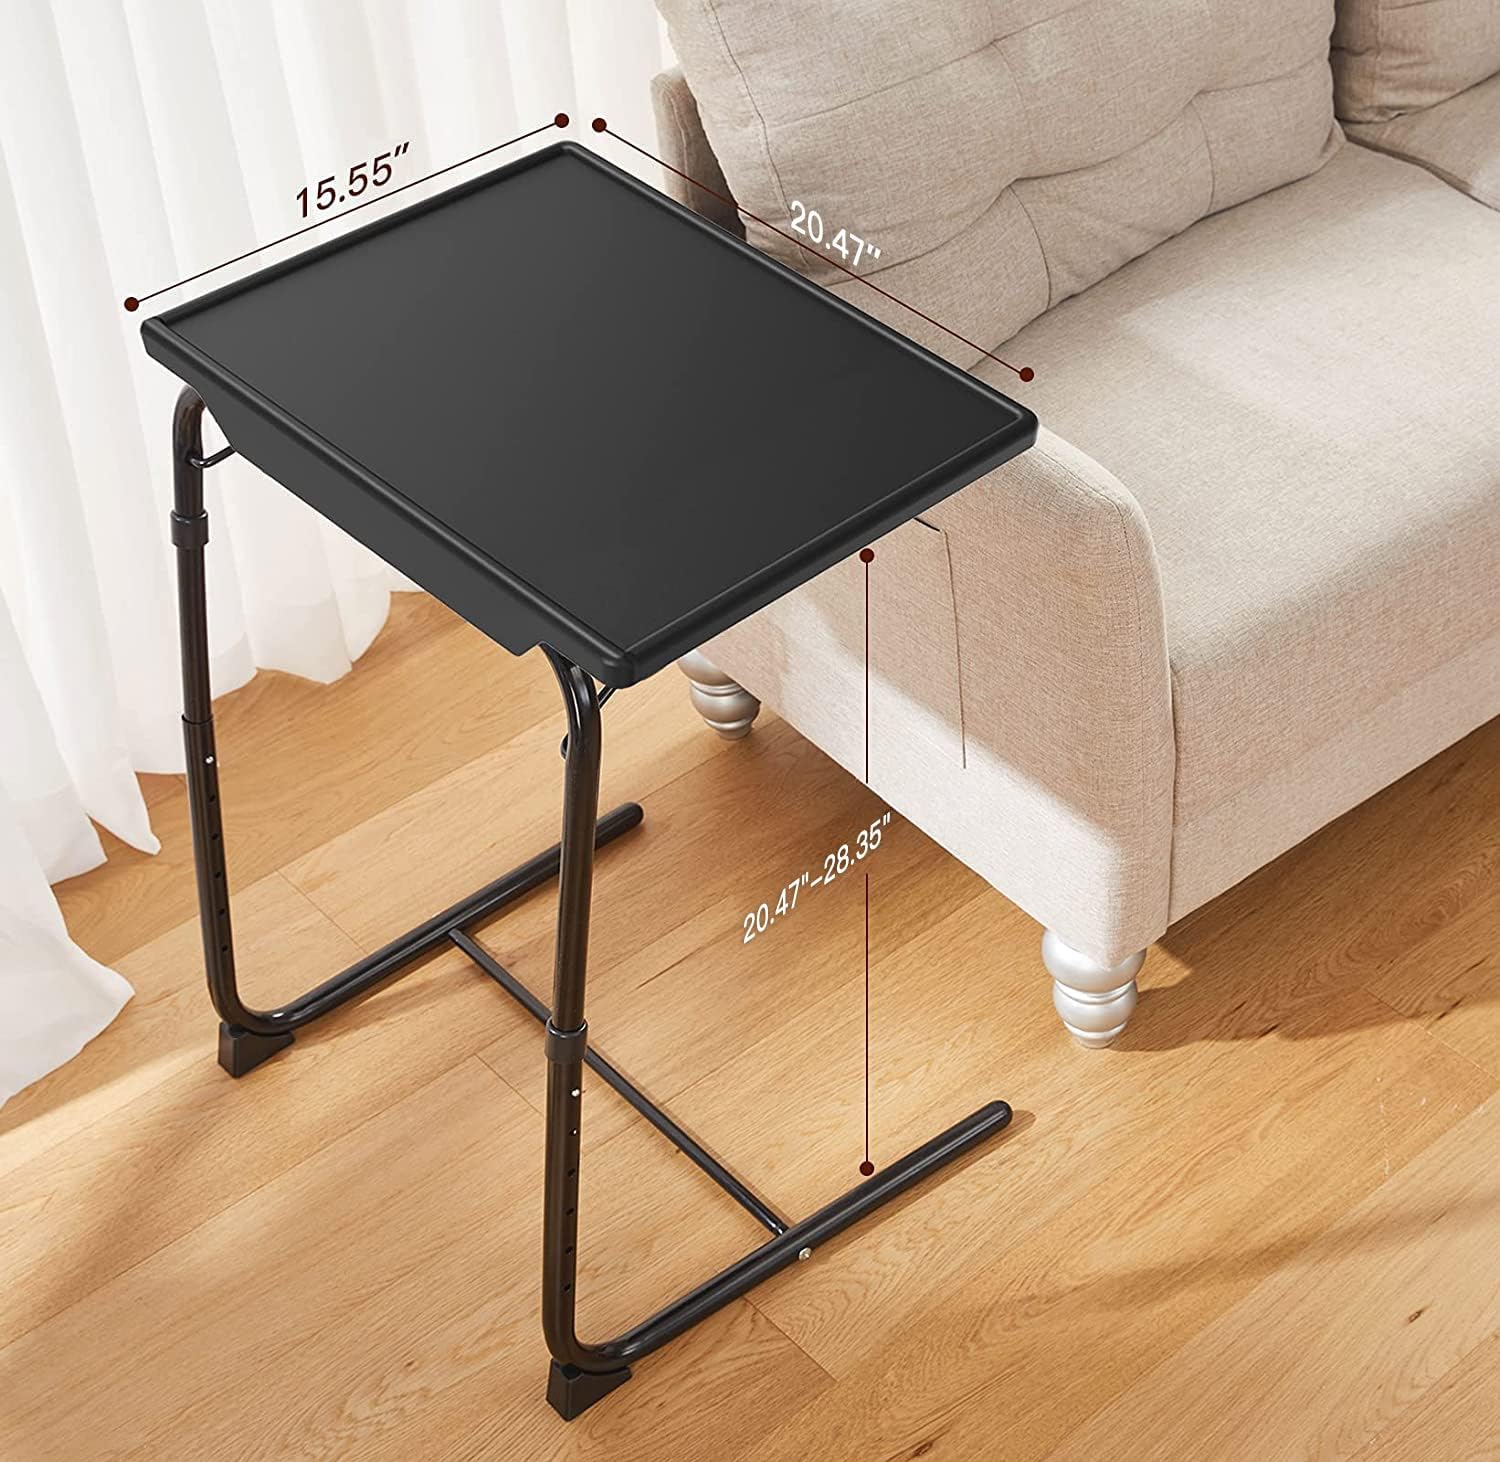 HUANUO Adjustable TV Trays - TV Tray Tables on Bed & Sofa